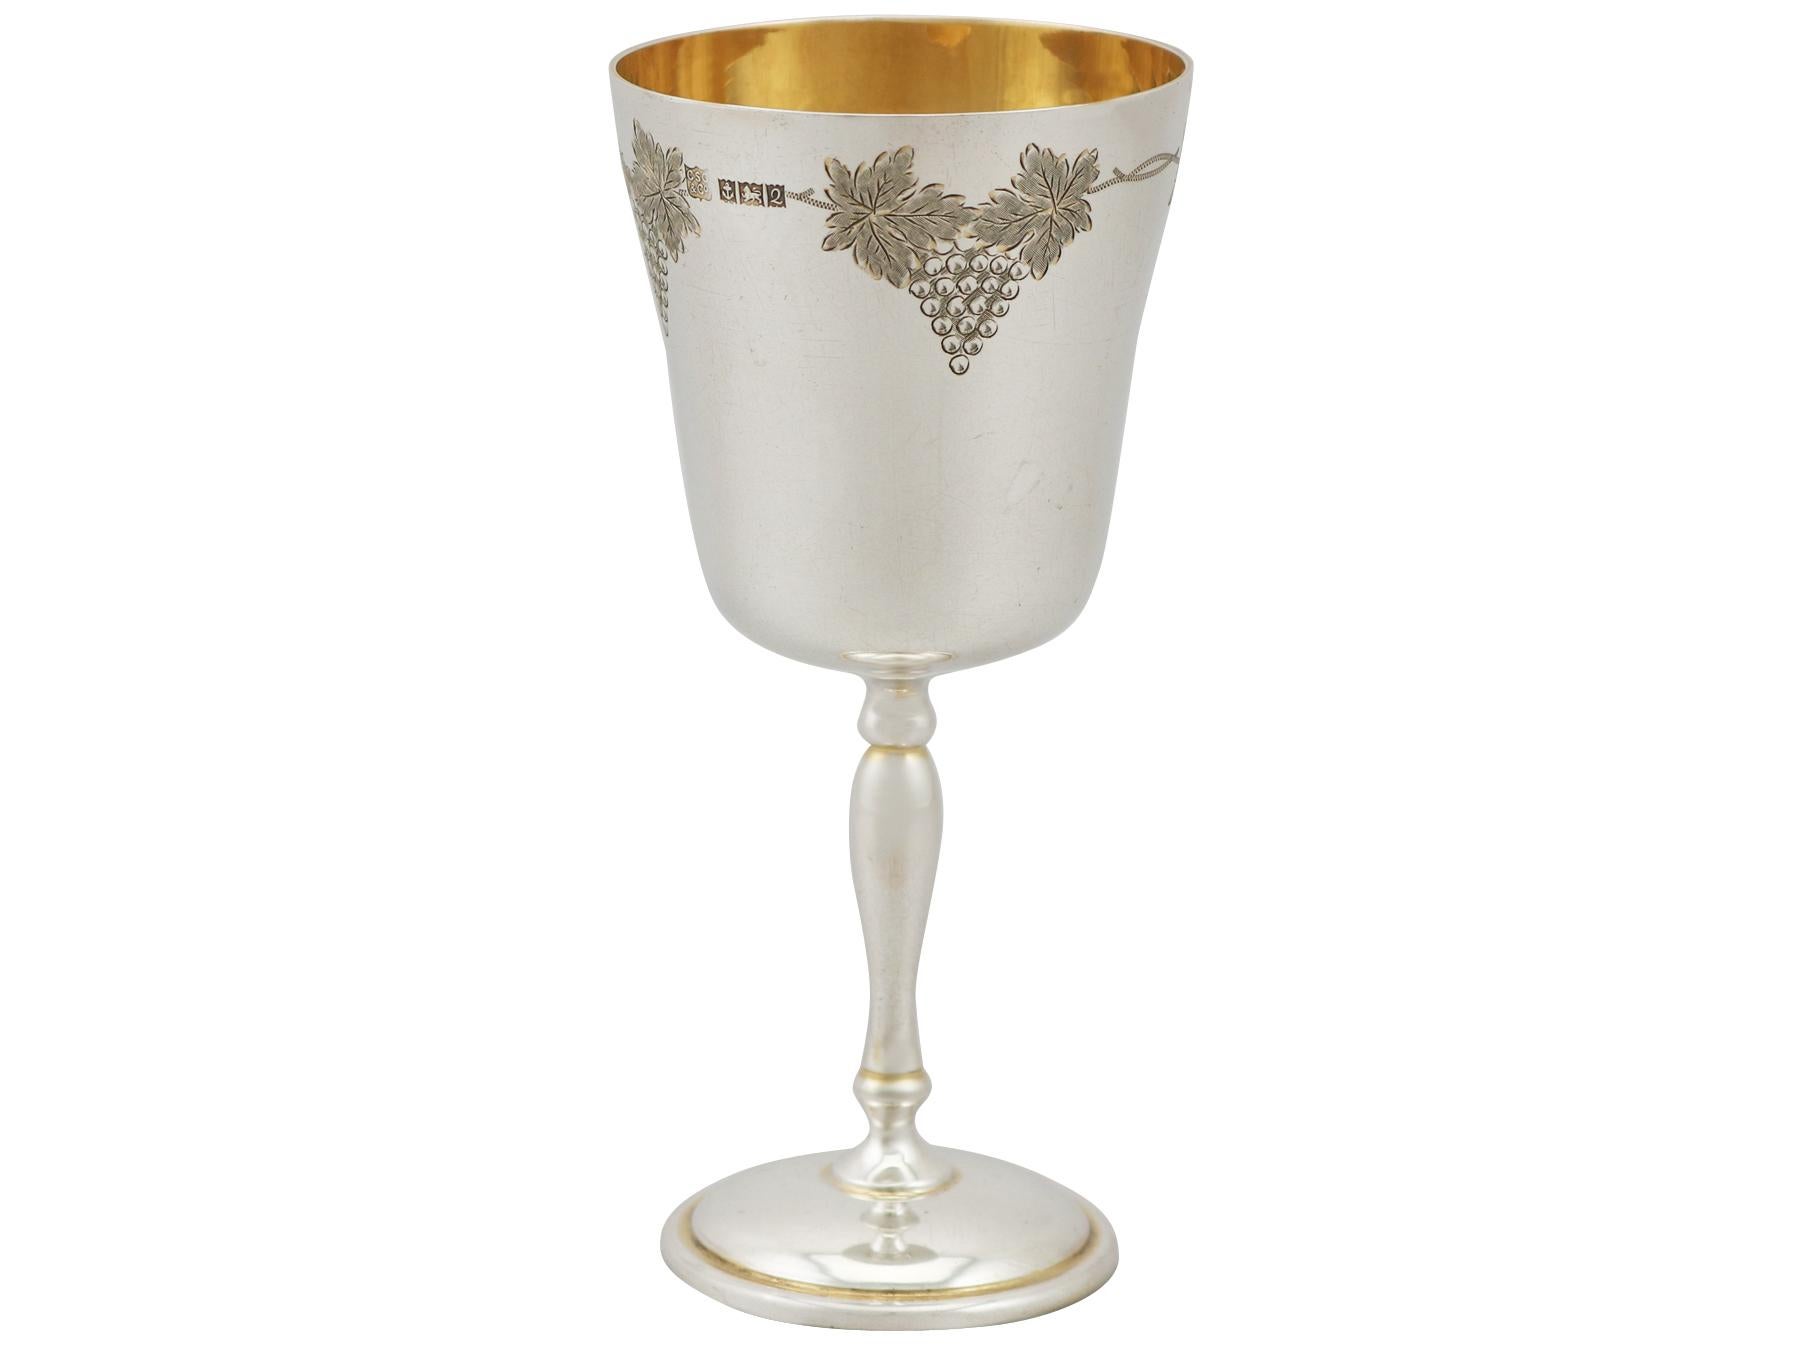 A fine and impressive vintage Elizabeth II sterling silver goblet; an addition to our wine and drinks related silverware collection.

This fine vintage English sterling silver goblet has a plain bell shaped form onto a cylindrical baluster shaped